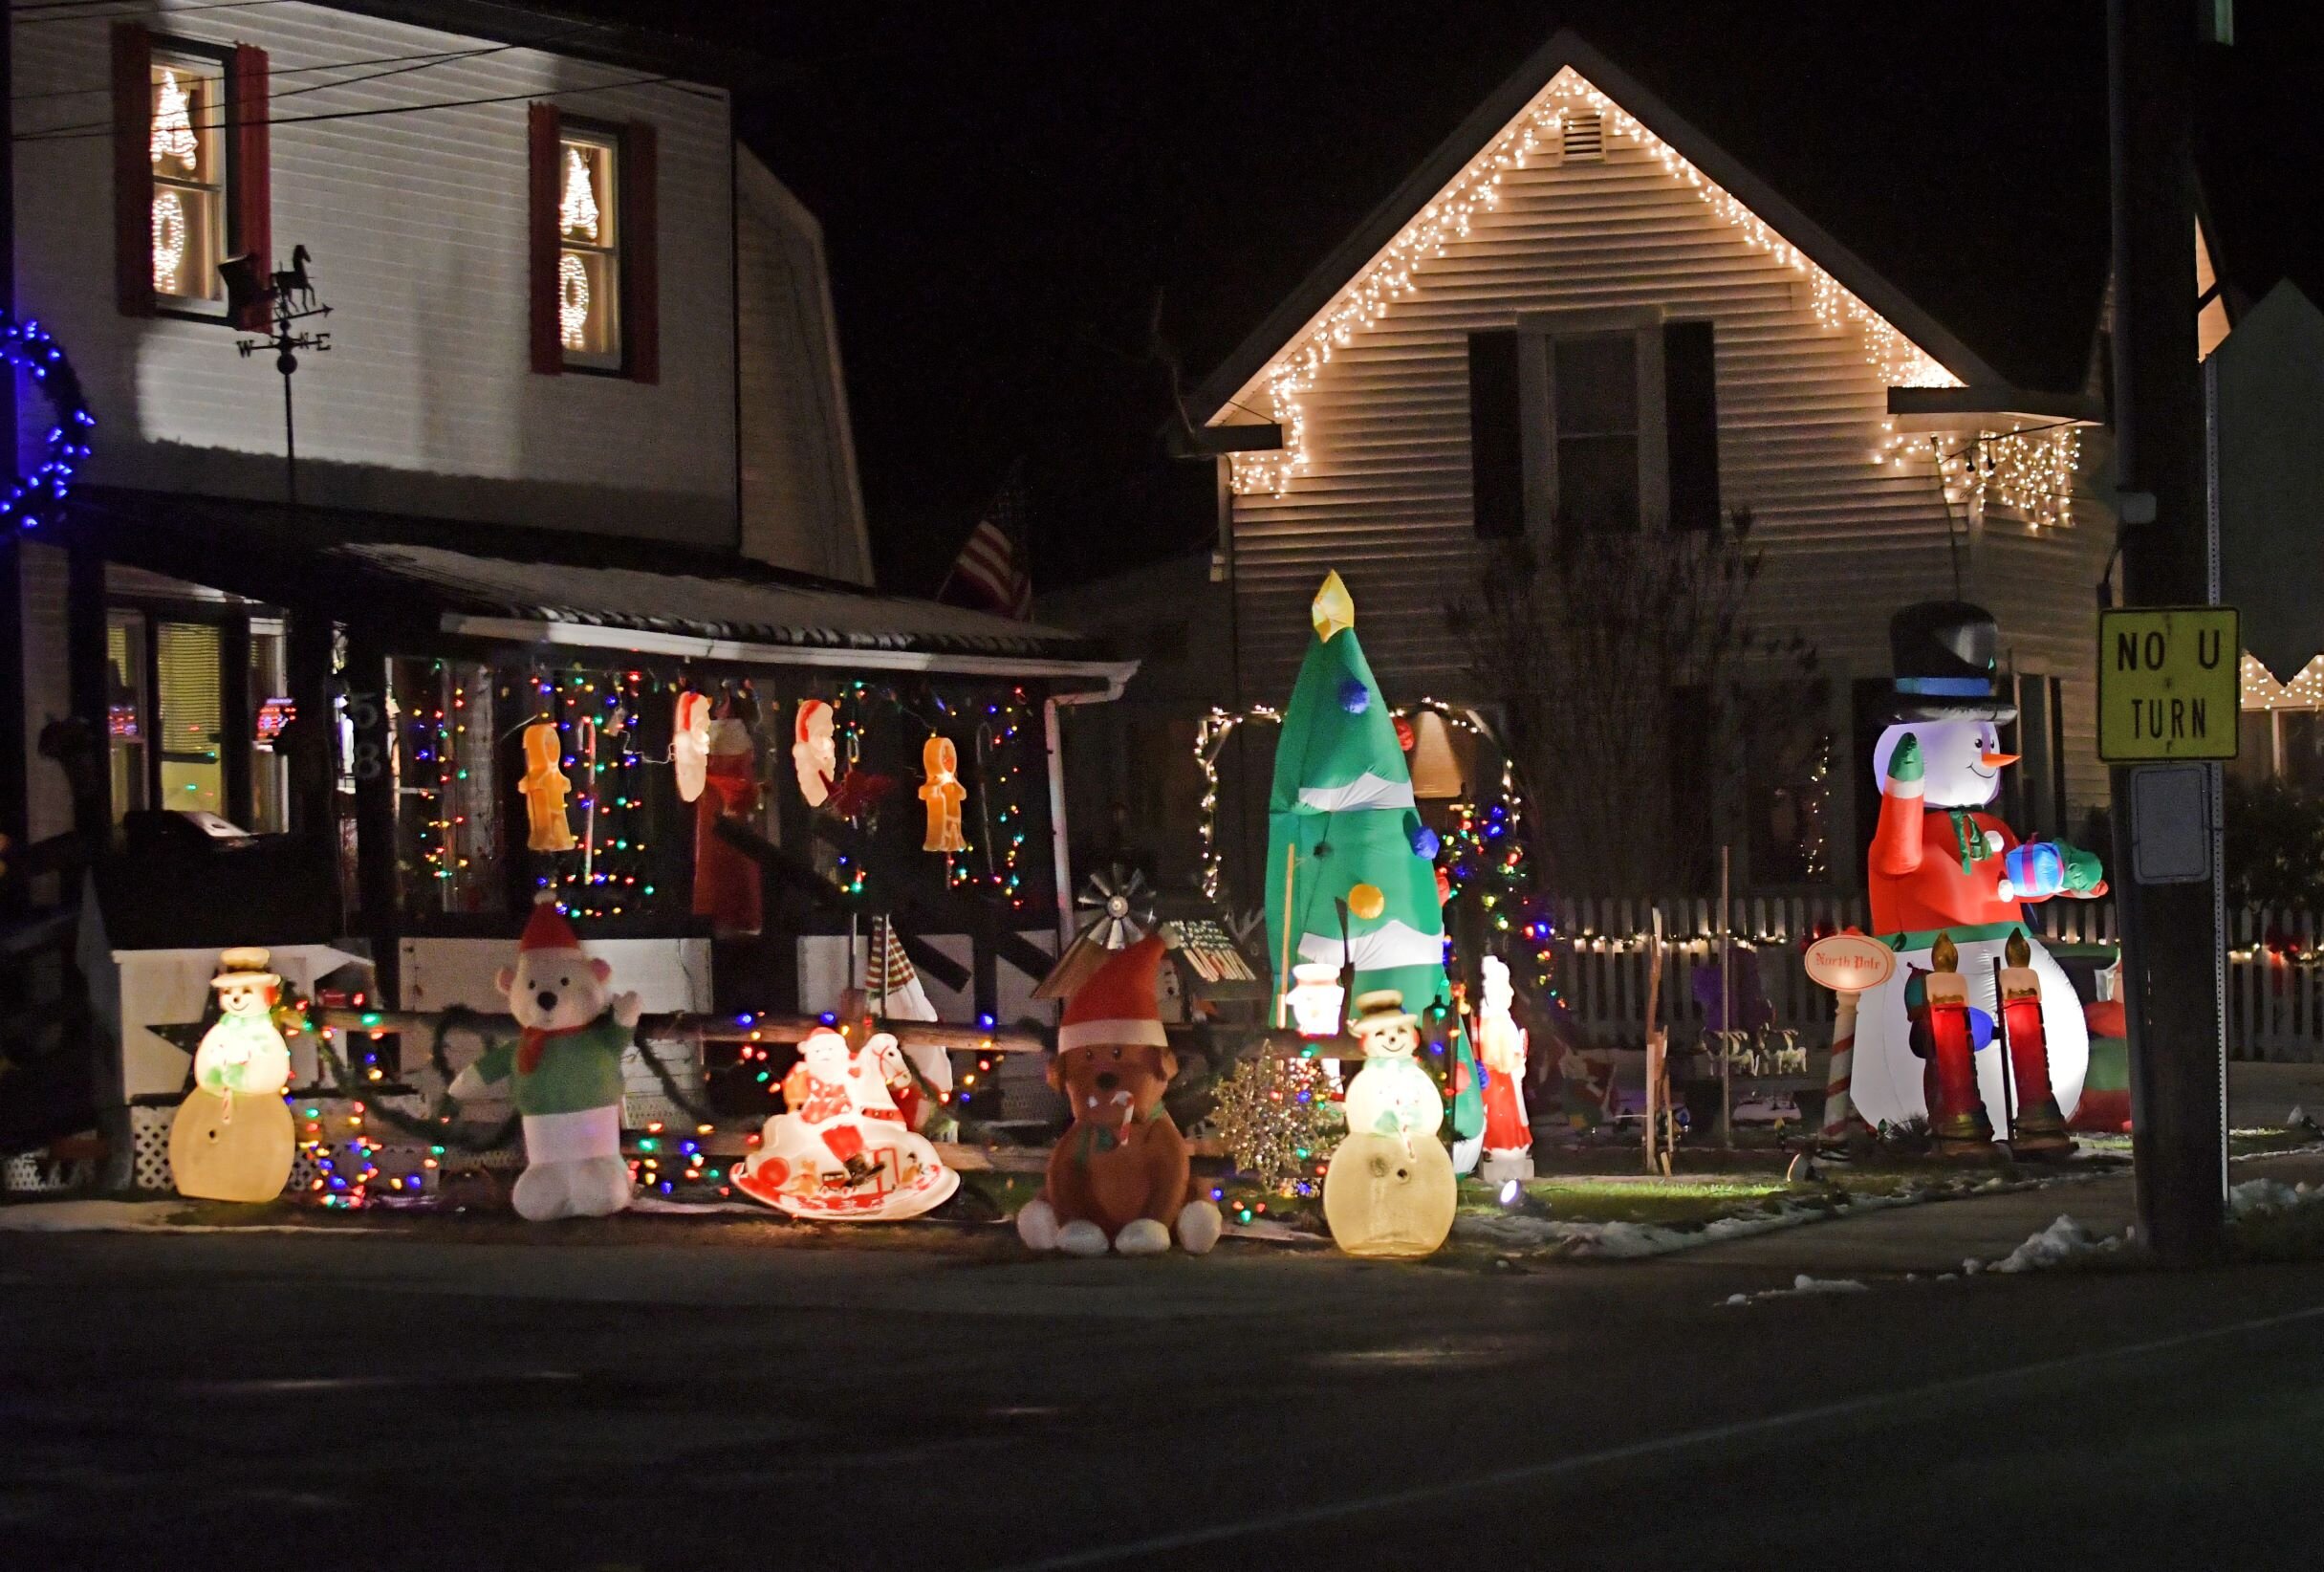   This eye-catching display on North Main Street delights passers by. Photo by Gordon Miller.   